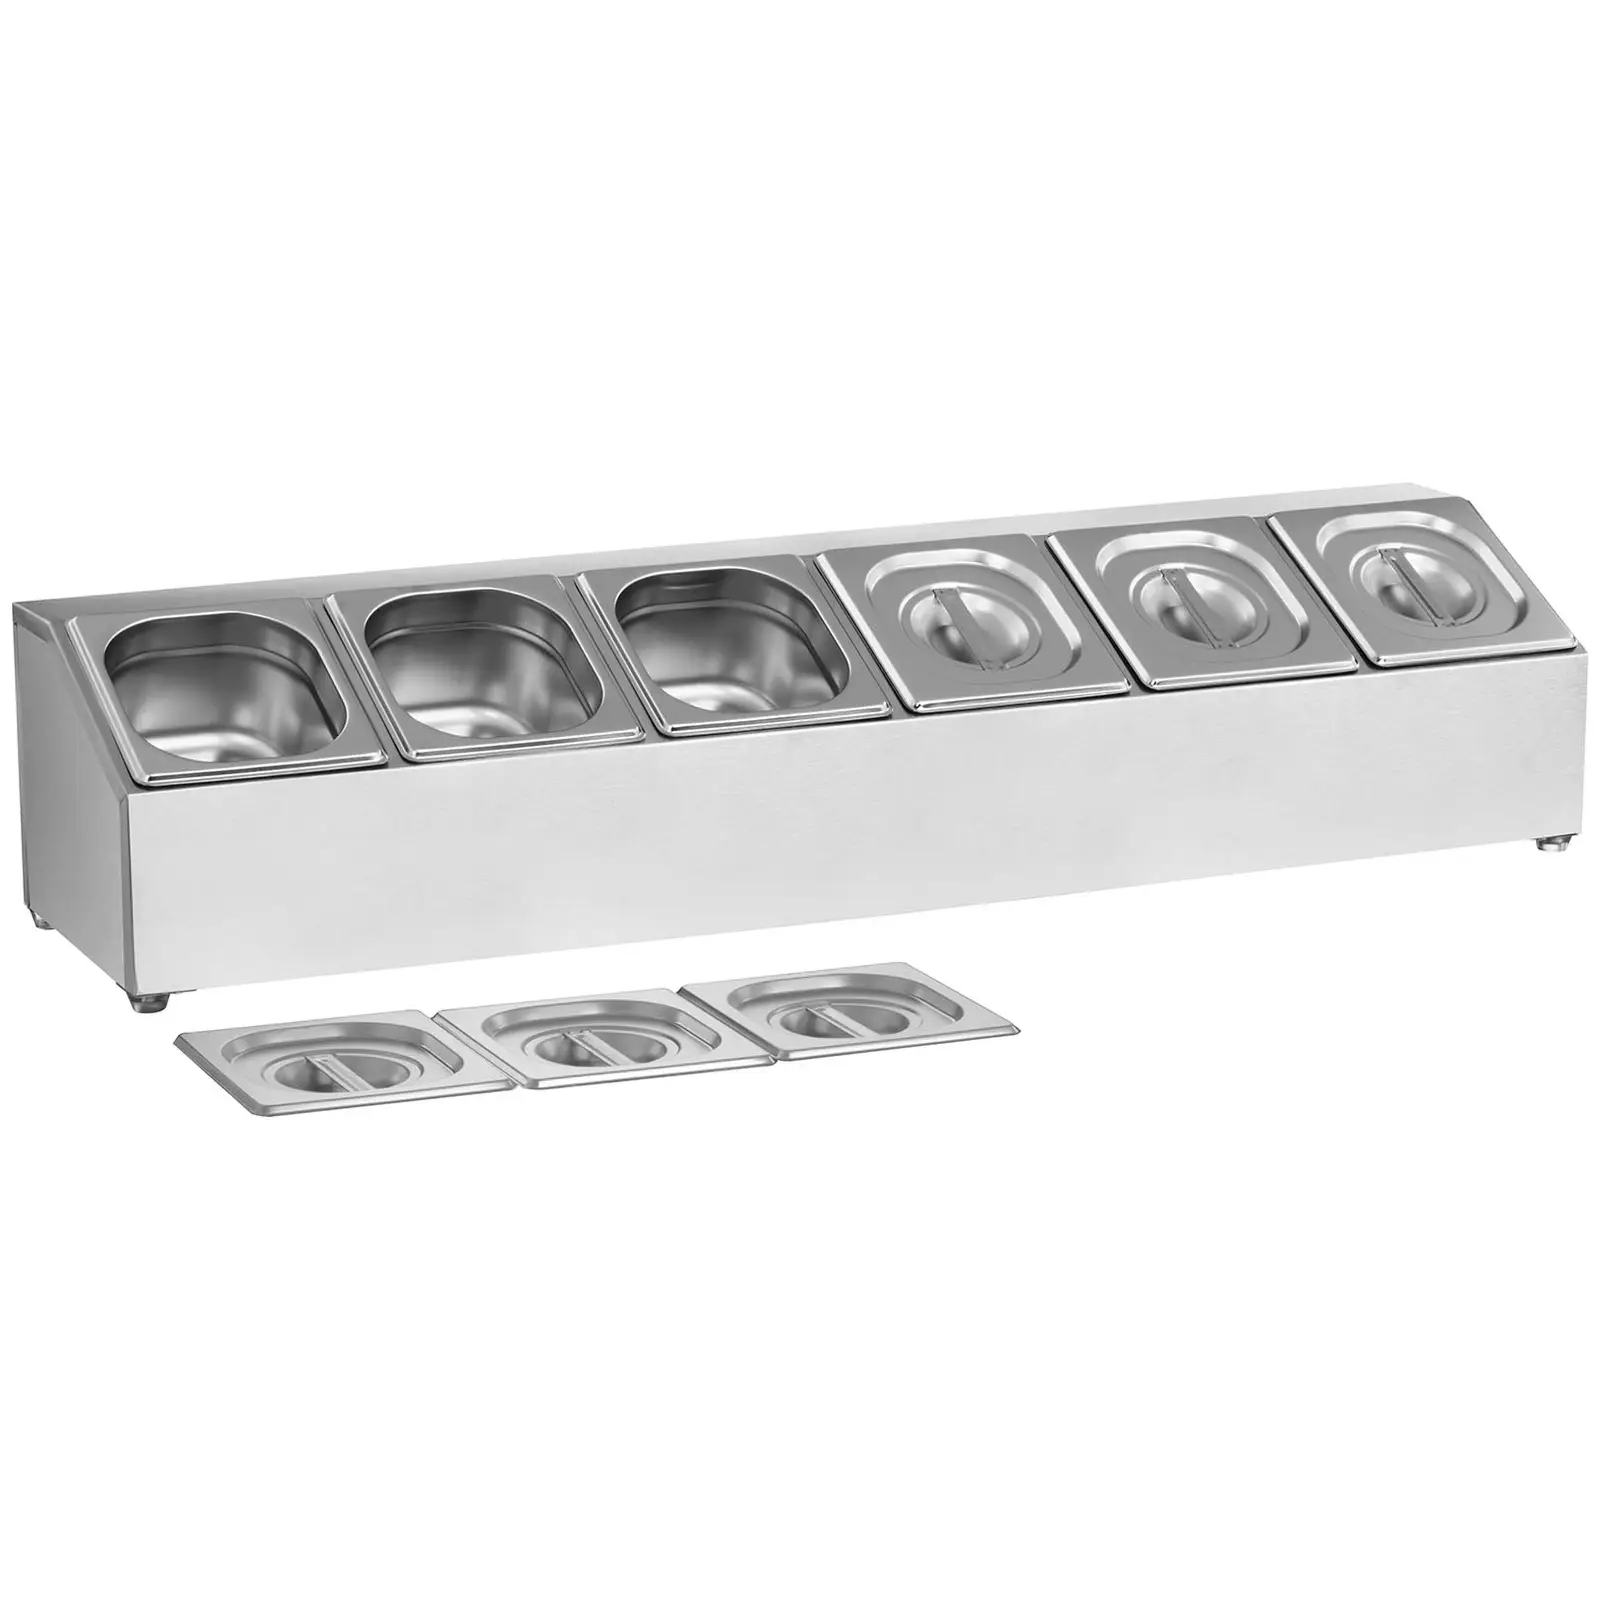 Gastronorm Pan Holder - Incl 6 1/6 Gastronorm Containers with Lids